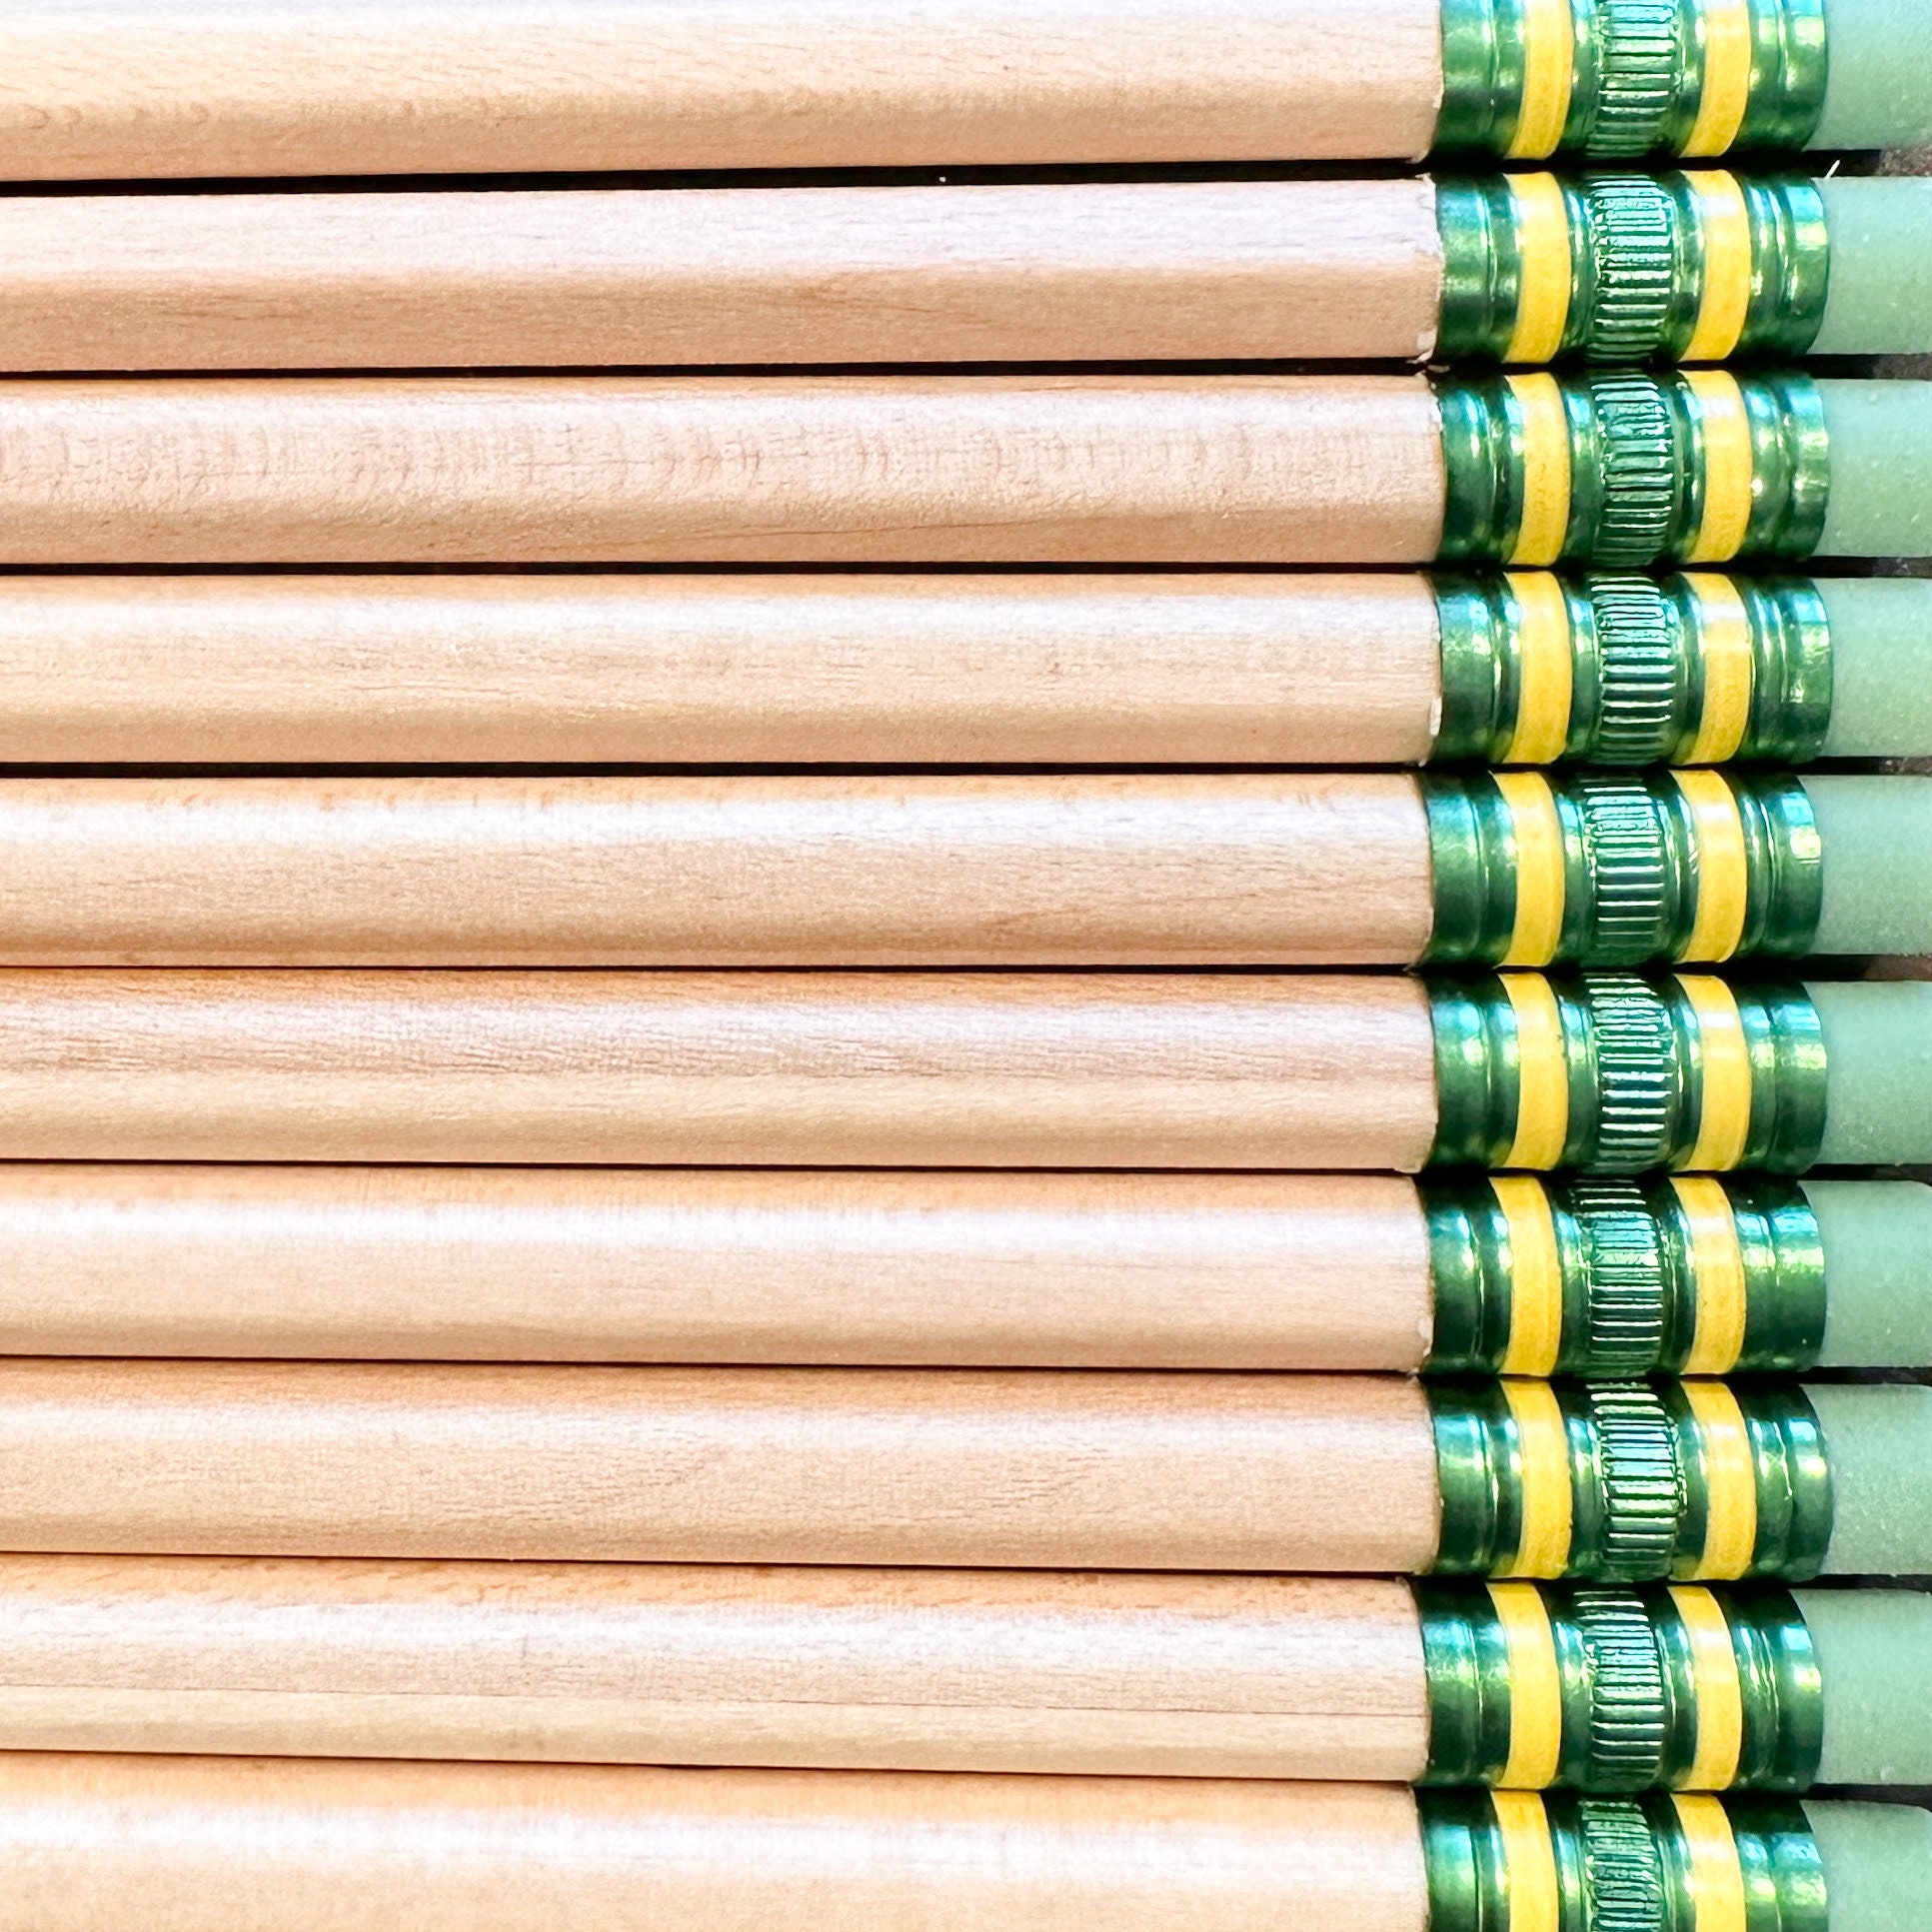 Personalised Pencils: The Stationery That Finds Its Way Home